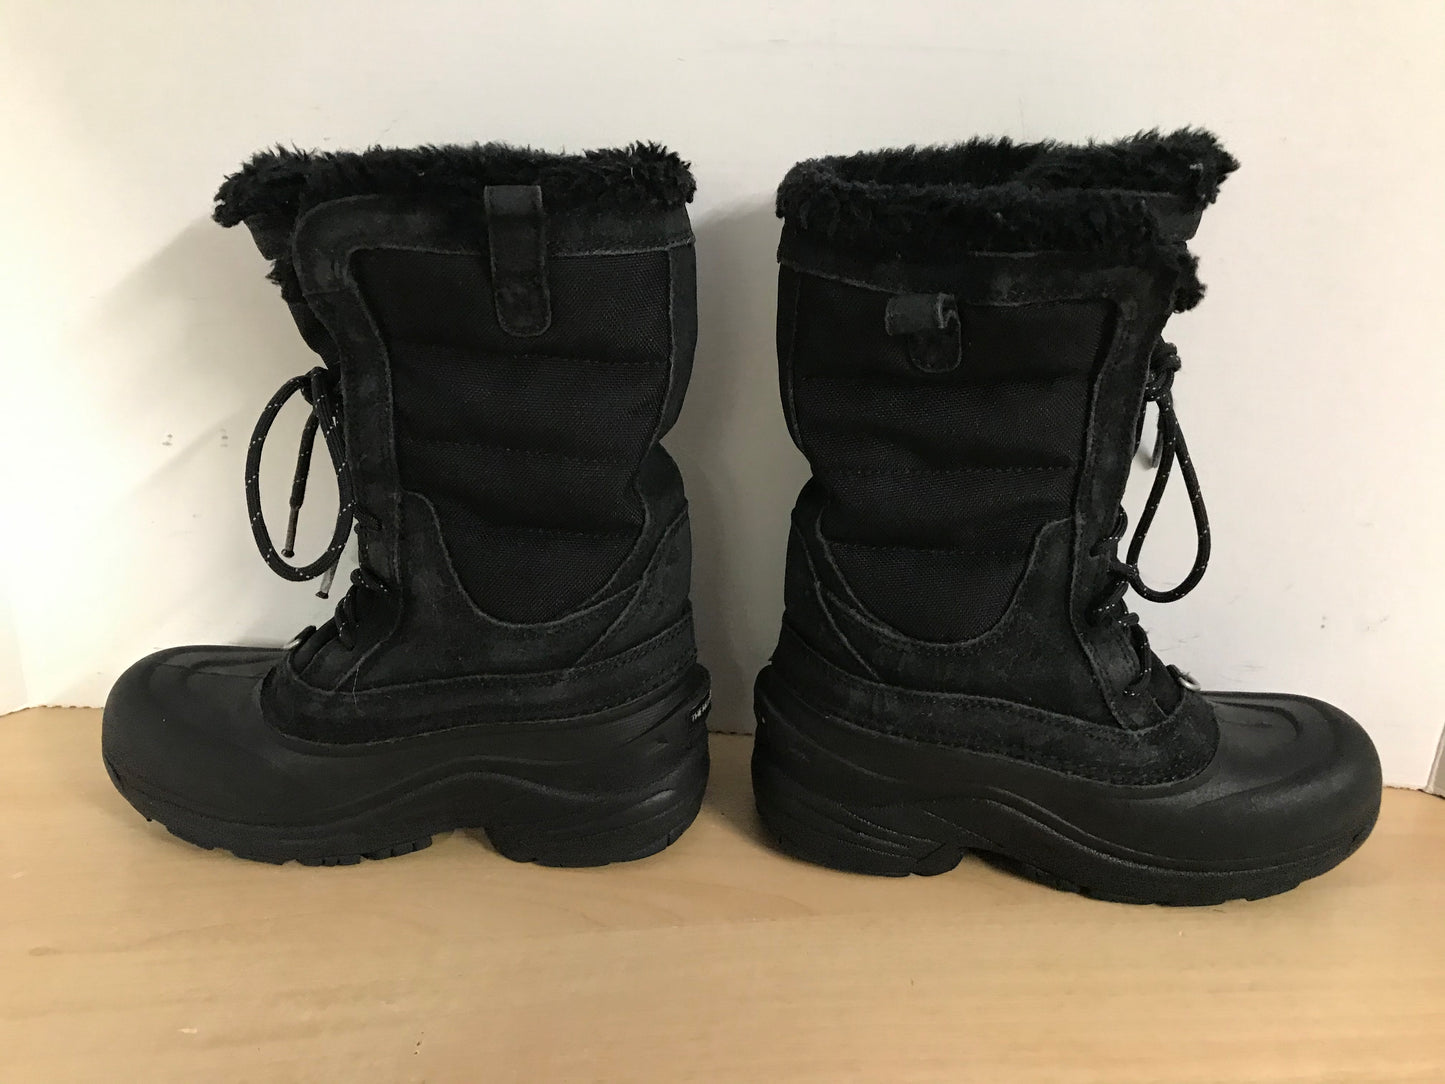 Winter Boots Child size 2 The North Face Black With Faux Fur Minor Wear